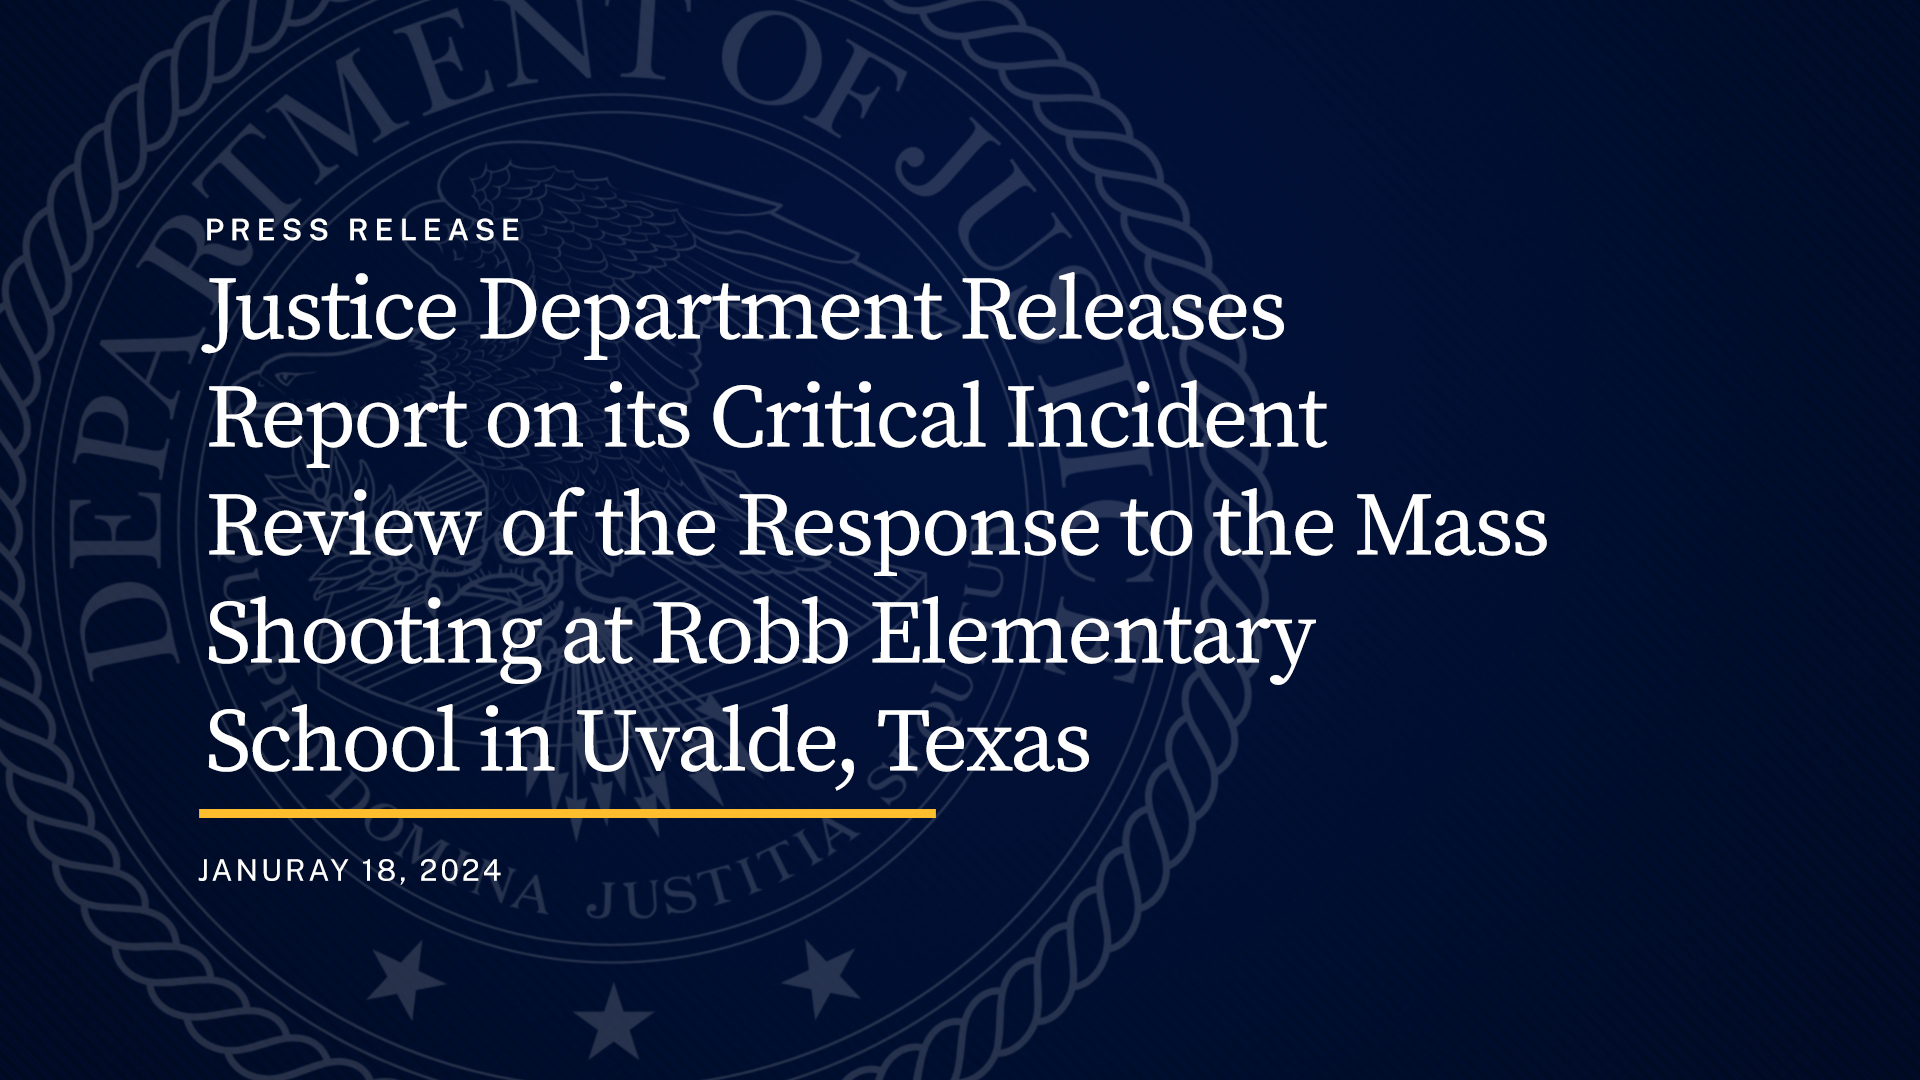 You are currently viewing Justice Department Releases Report on its Critical Incident Review of the Response to the Mass Shooting at Robb Elementary School in Uvalde, Texas